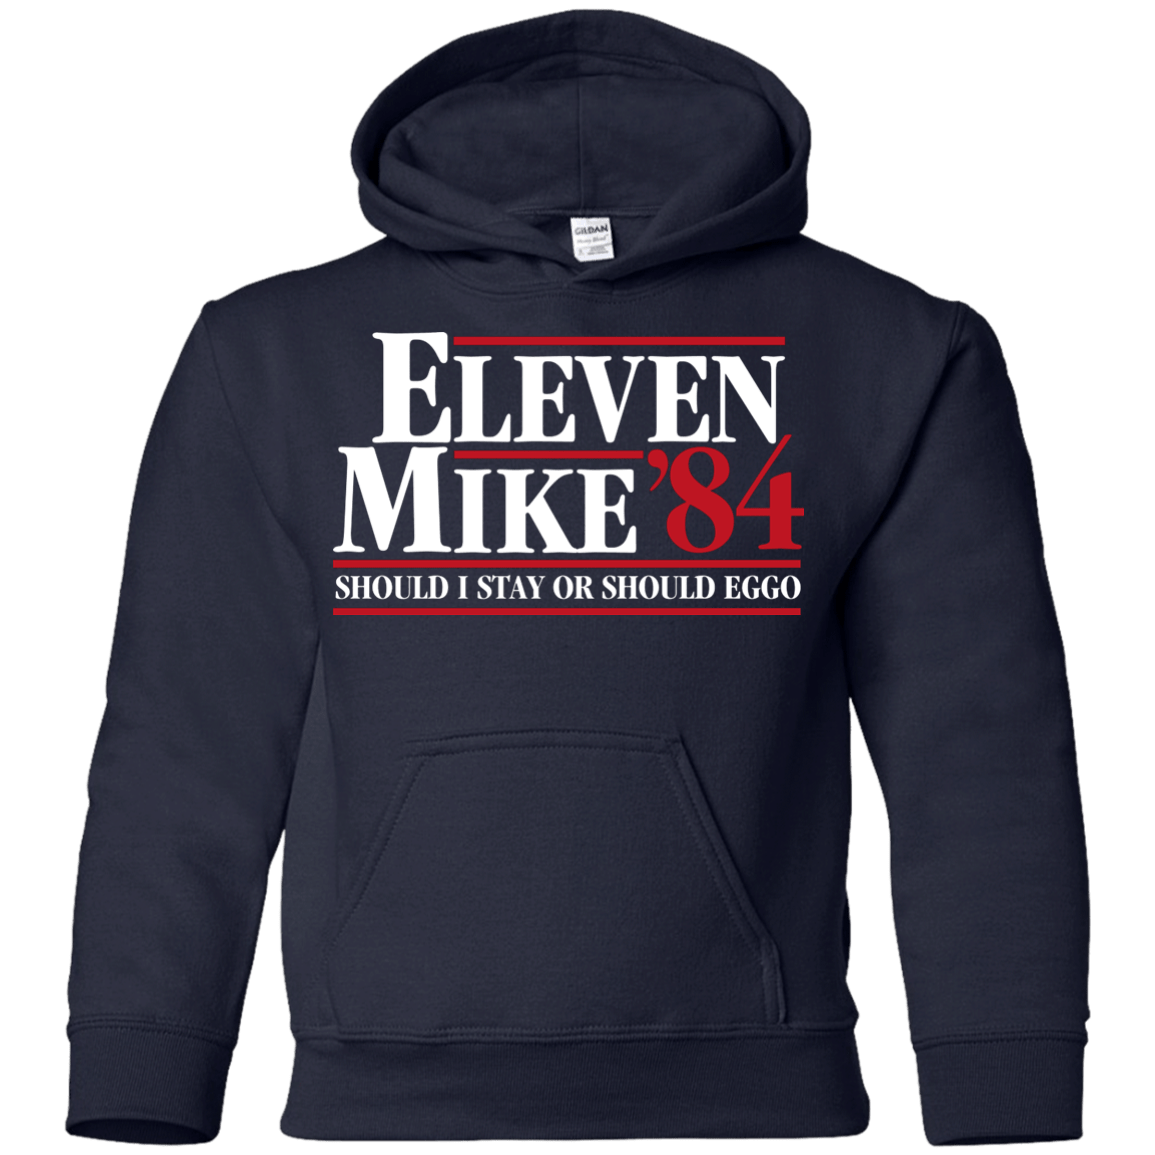 Sweatshirts Navy / YS Eleven Mike 84 - Should I Stay or Should Eggo Youth Hoodie